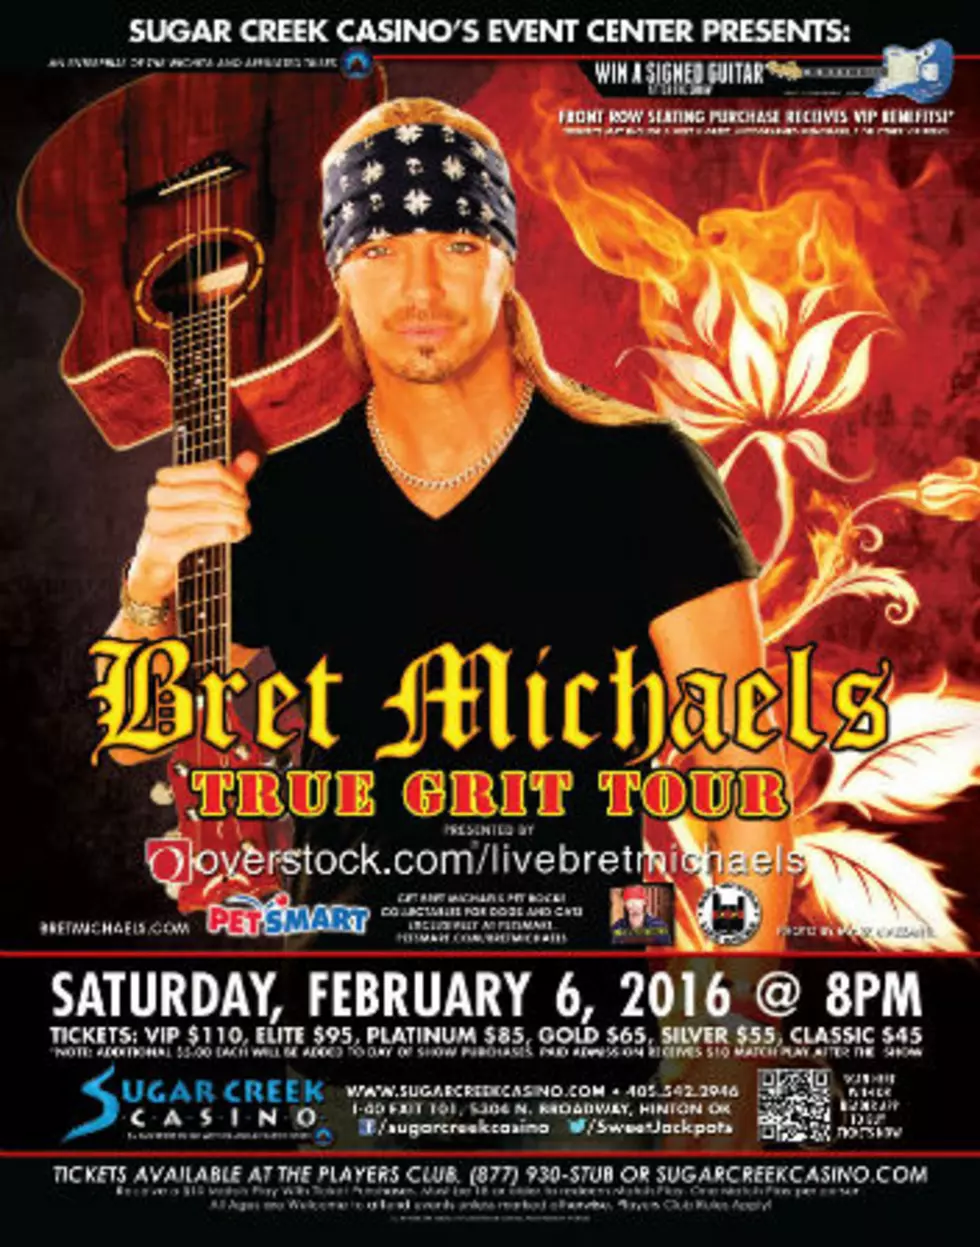 Win a Pair of Free Tickets to see Bret Michaels Live!